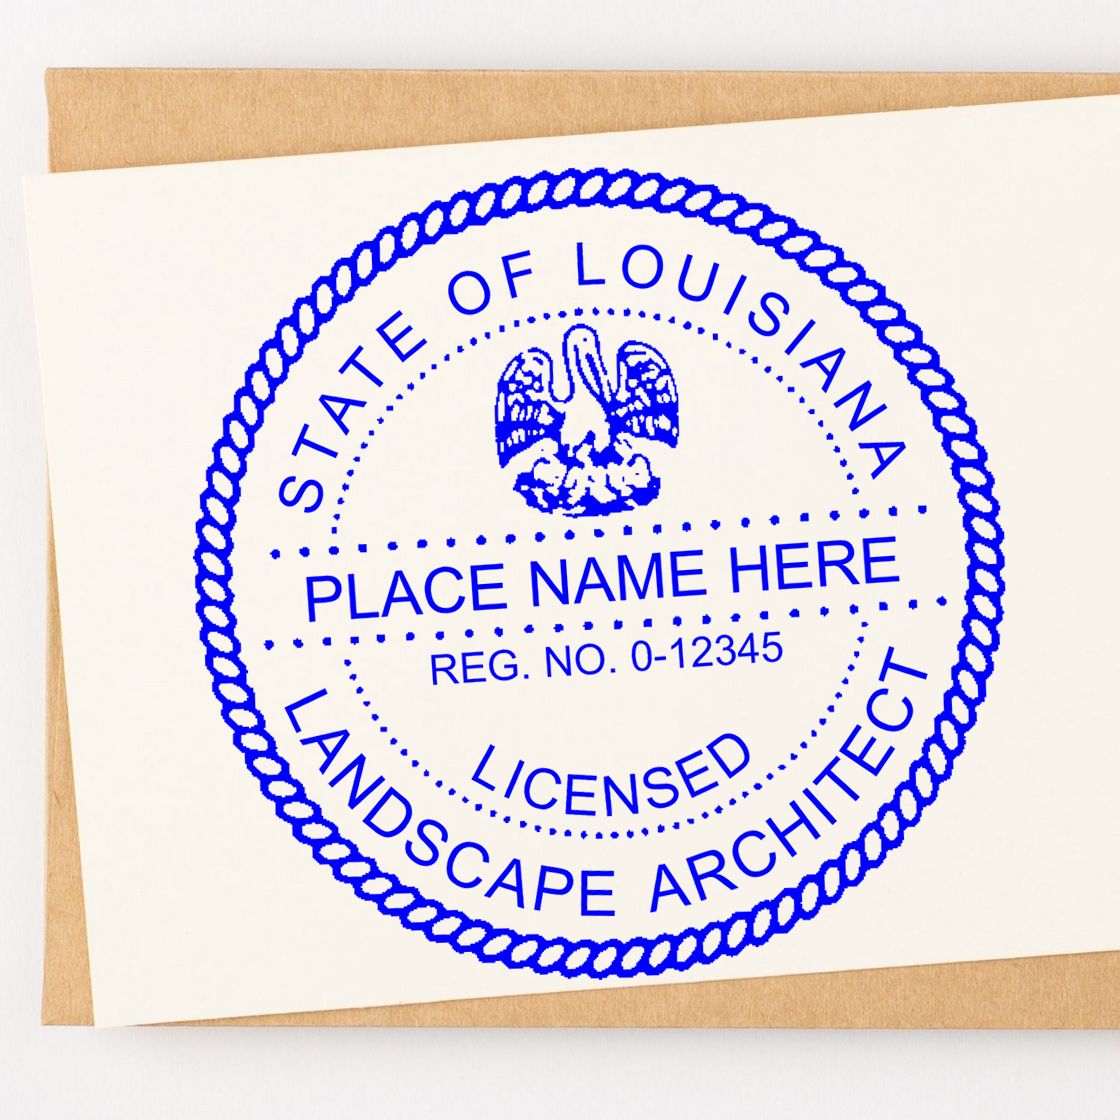 The main image for the Premium MaxLight Pre-Inked Louisiana Landscape Architectural Stamp depicting a sample of the imprint and electronic files